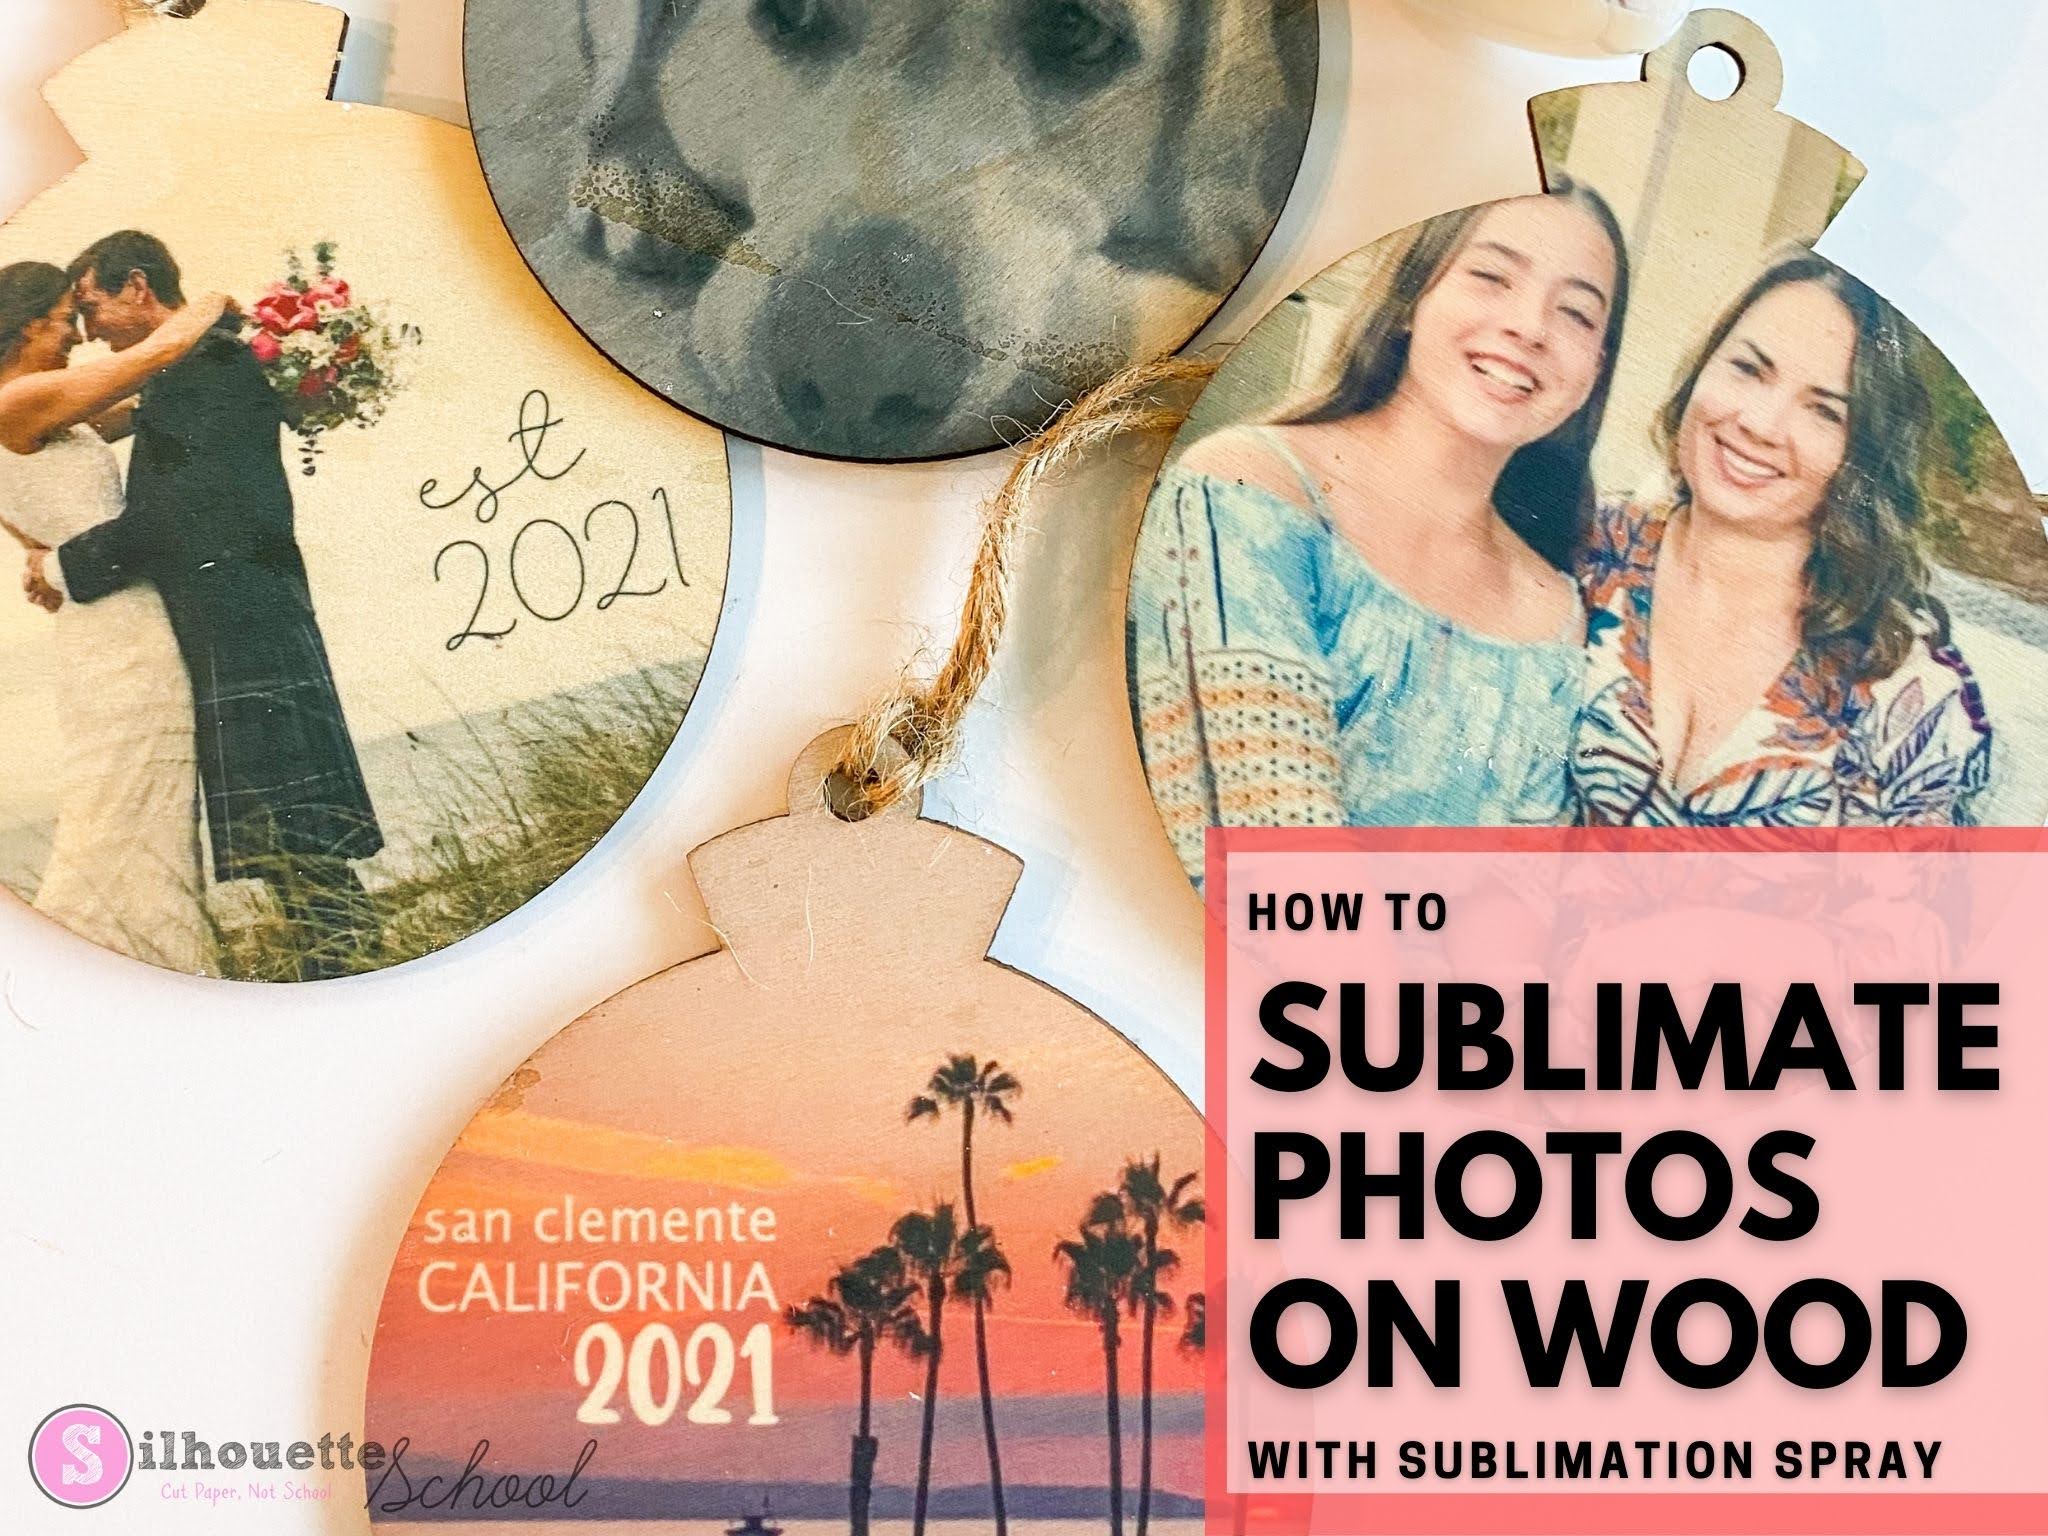 Sublimation for Beginners -Complete Step-By-Step Guide 